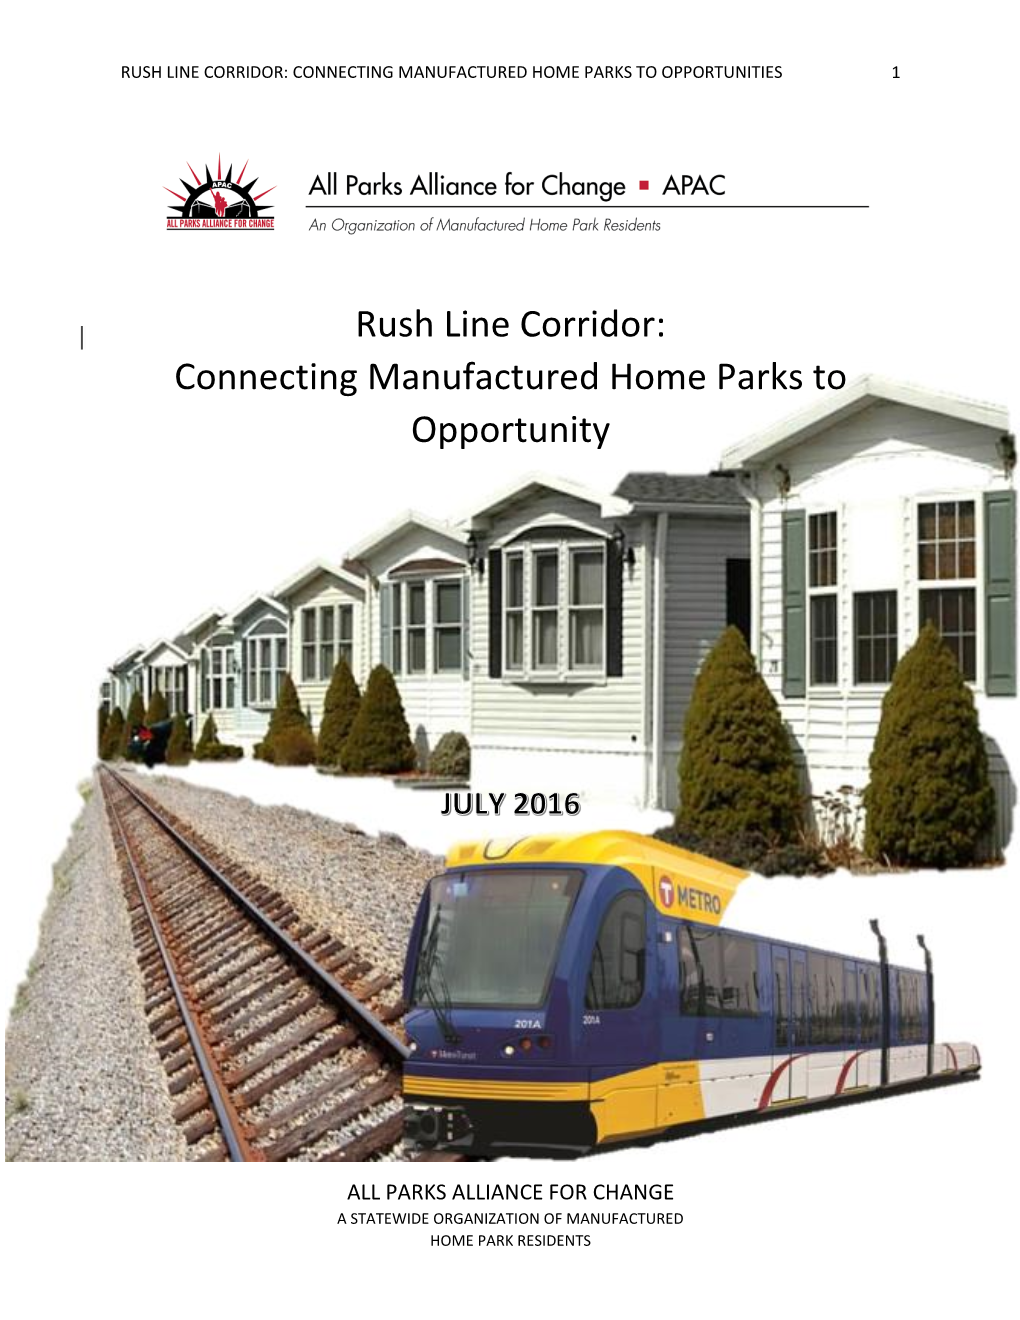 Rush Line Corridor: Connecting Manufactured Home Parks to Opportunities 1